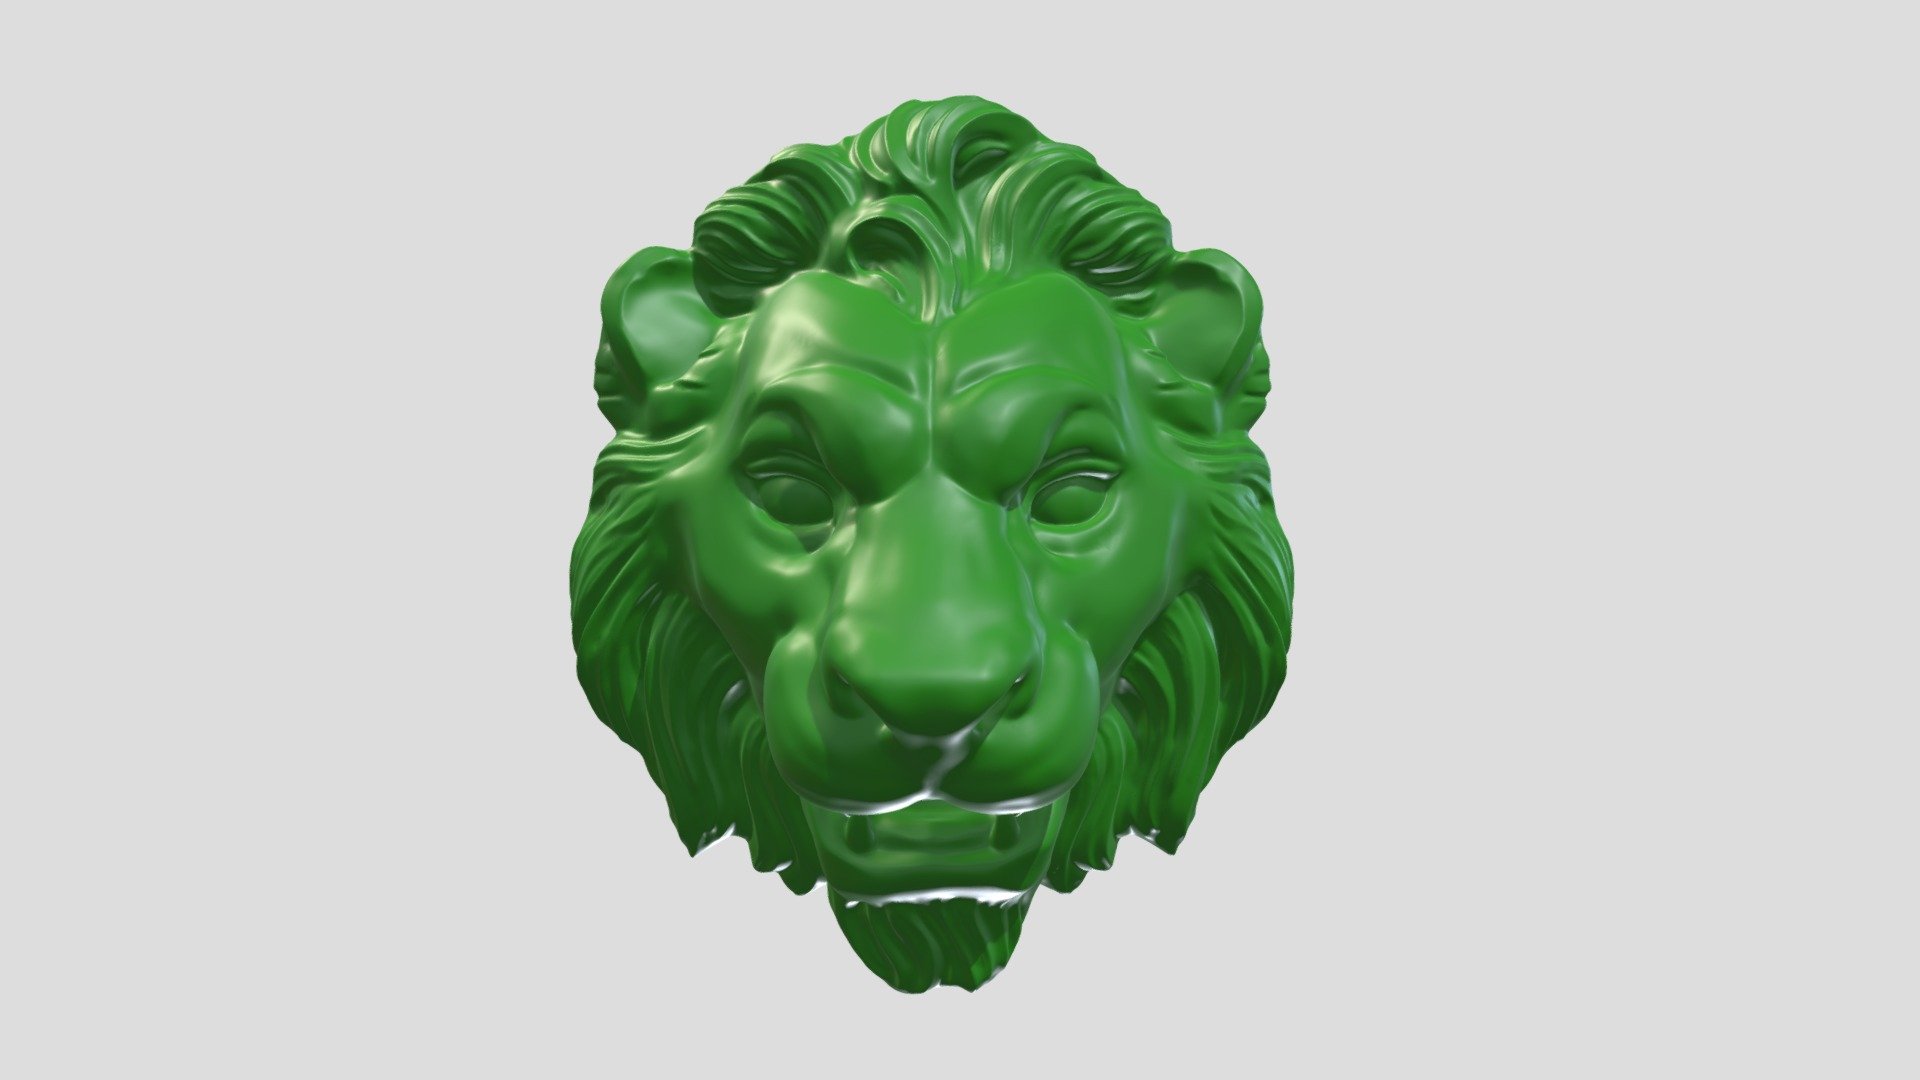 Dimension:
1. Heigh 5cm
2. Thickness: 0.6mm
Hi, I'm Frezzy. I am leader of Cgivn studio. We are a team of talented artists working together since 2013.
If you want hire me to do 3d model please touch me at:cgivn.studio Thanks you! - 3D Printable Lion Head 02 - 3D model by Frezzy3D 3d model